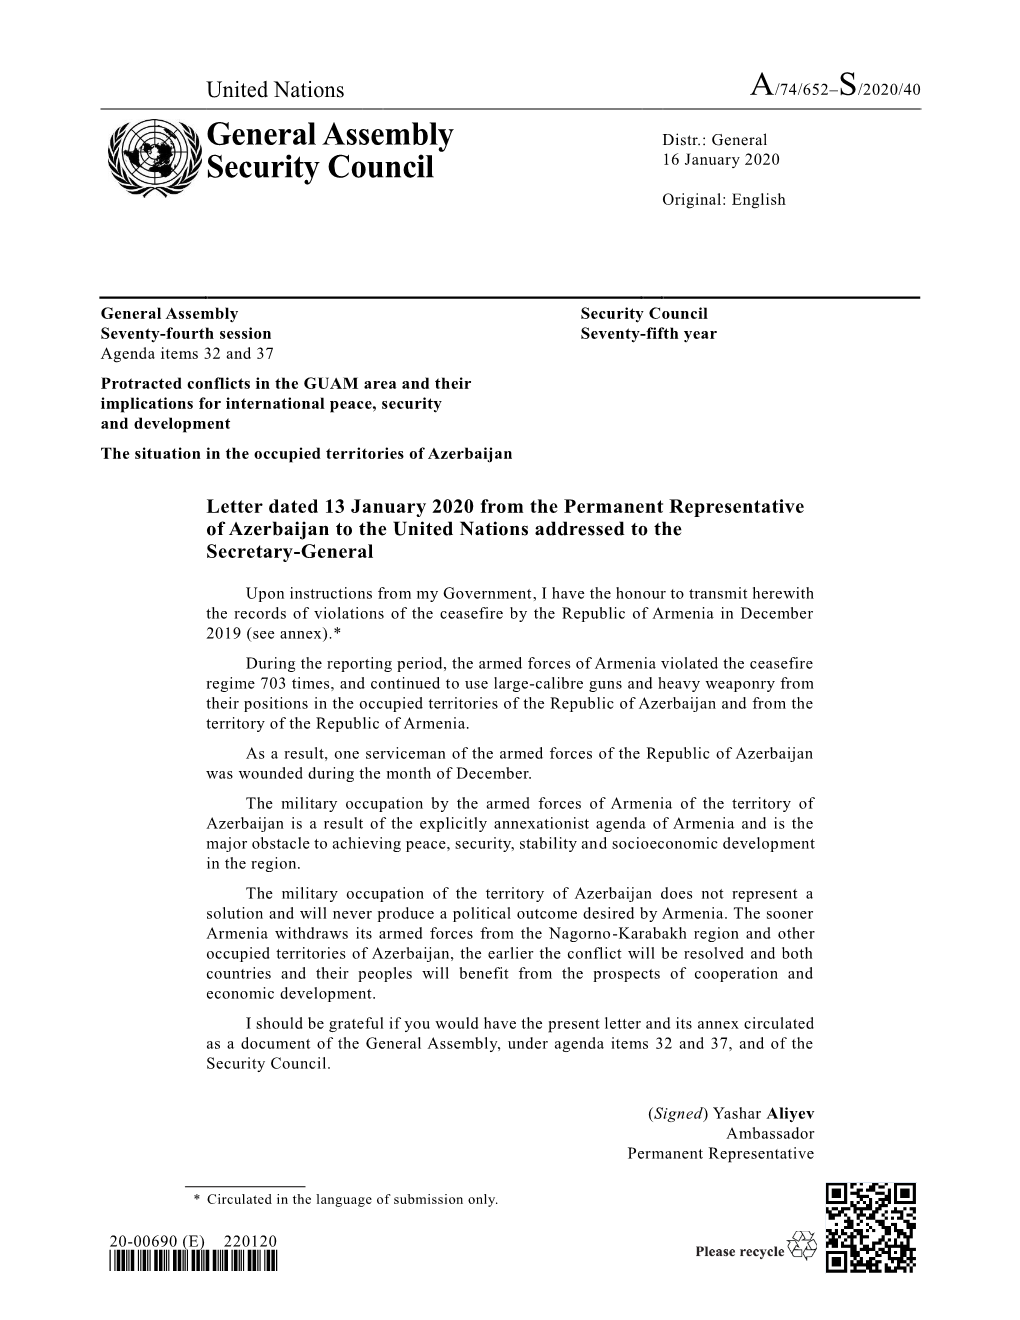 Letter Dated 13 January 2020 from the Permanent Representative of Azerbaijan to the United Nations Addressed to the Secretary-General